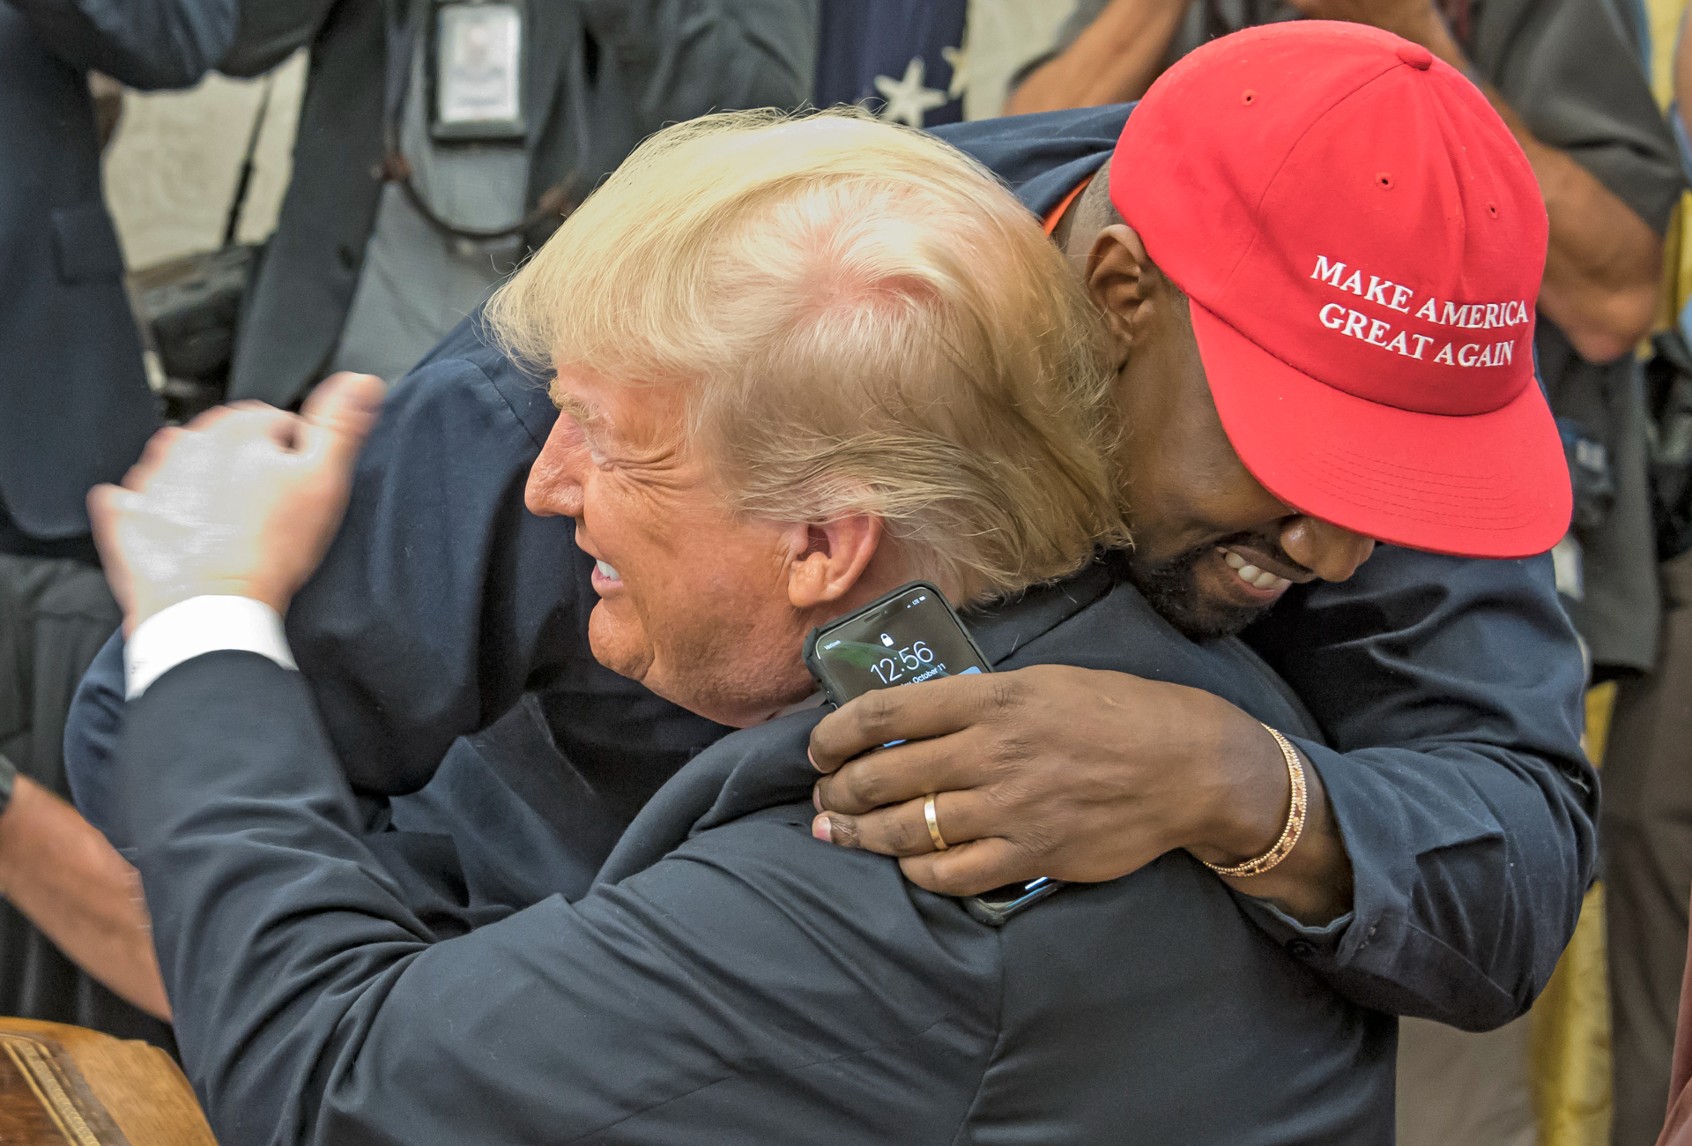 Trump calls Kanye West “a deeply troubled man” in new rant about their Mar-a-Lago dinner